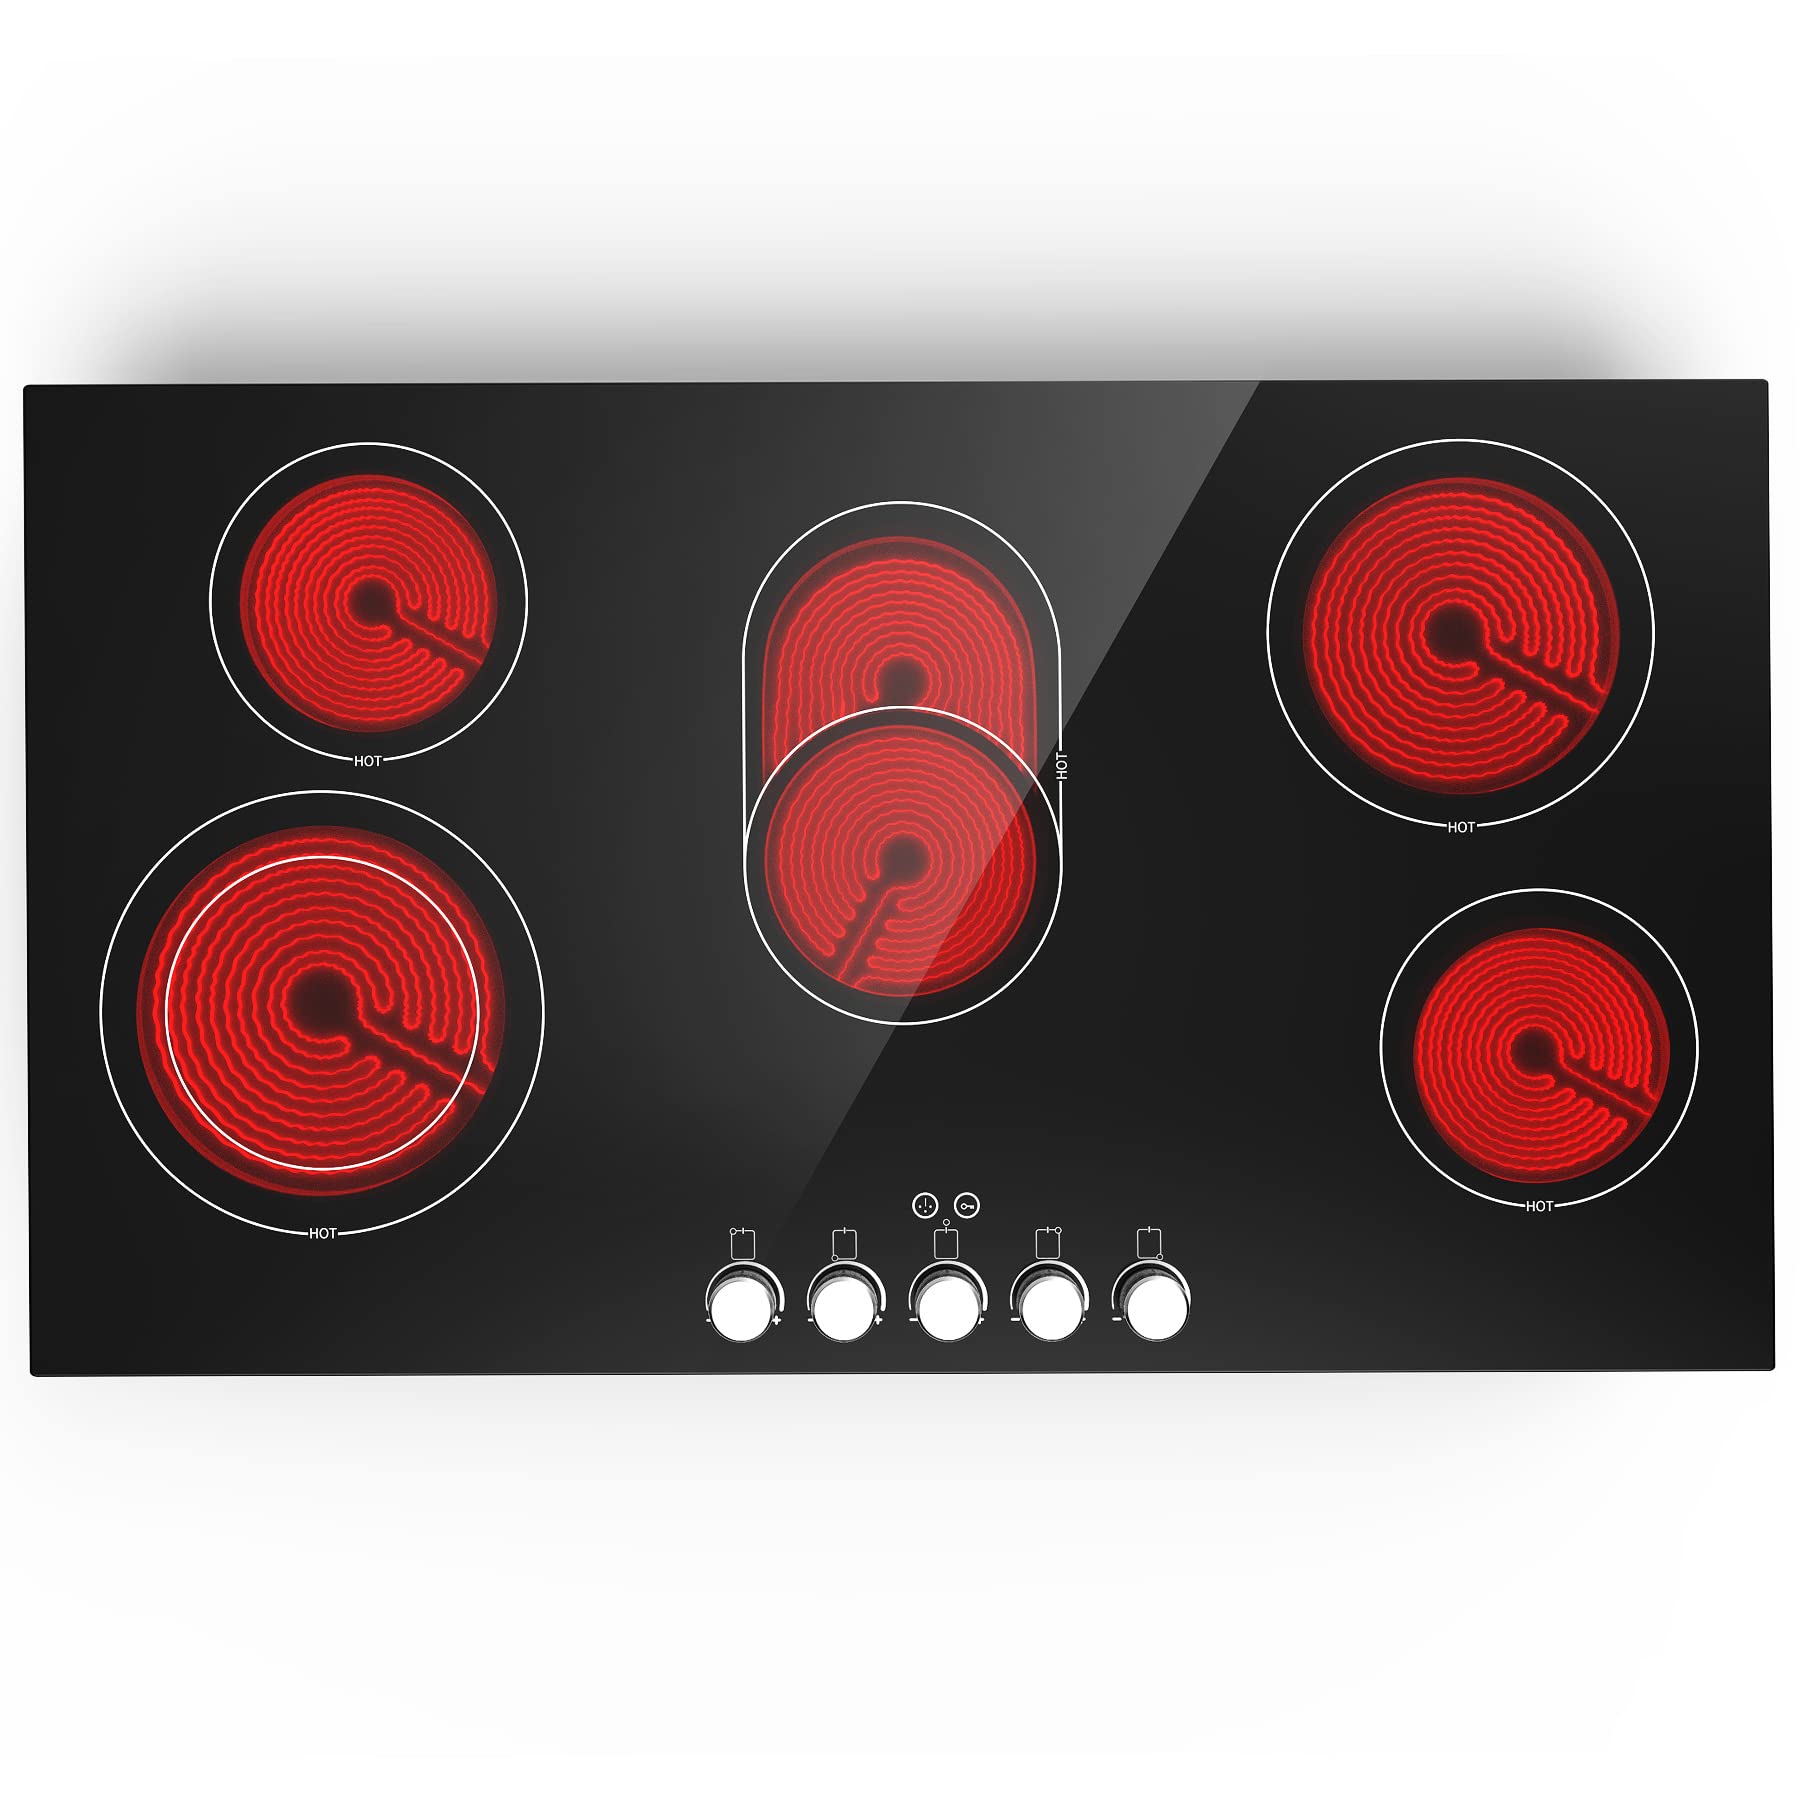 VBGK Electric cooktop 36 inch, 240V 8600W 36 inch induction cooktop，Built-in and Countertop Electric Stove Top, Knob Control 9 Heating Level Timer & Kid Safety Lock for.